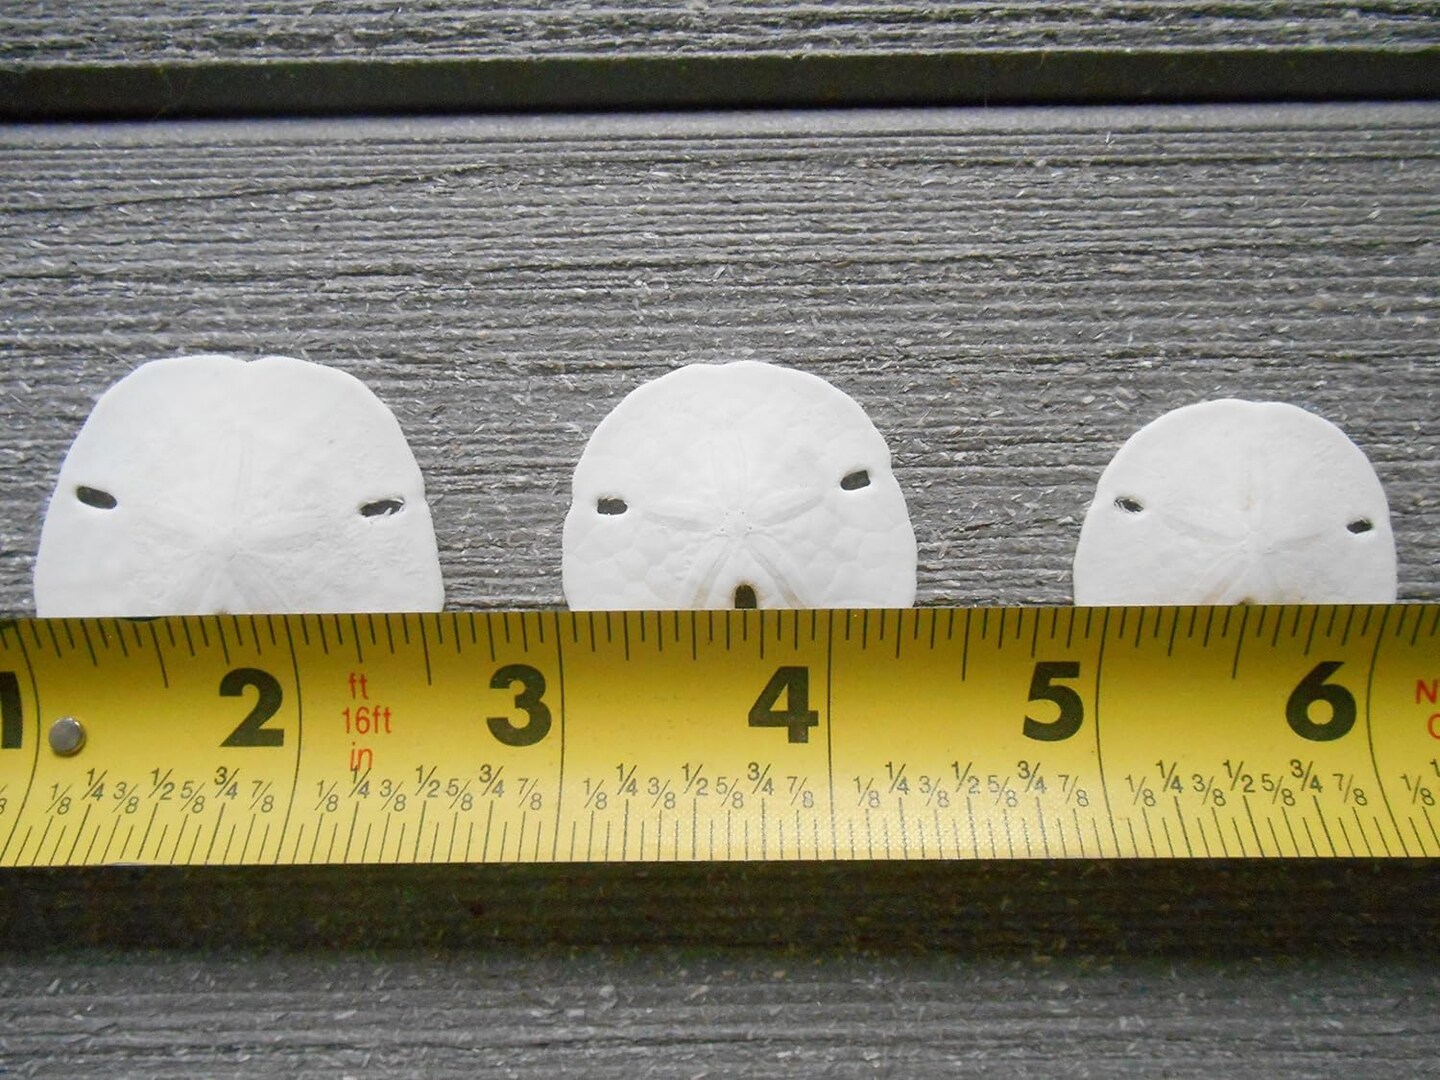 Hand Picked Natural White Sand Dollars 50 Pieces